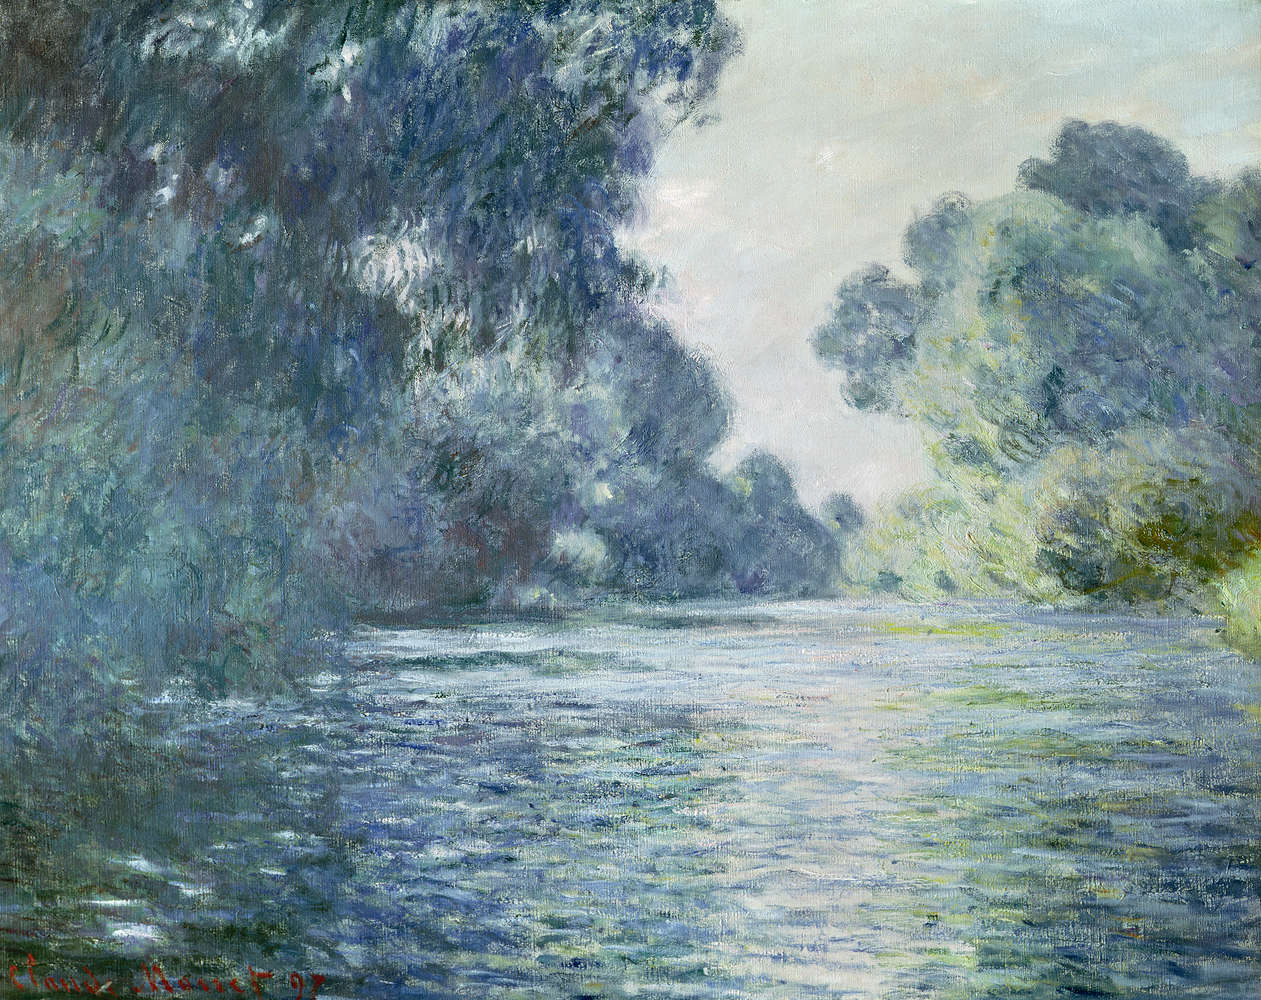             Photo wallpaper "On a branch of the Seine near Giverny" by Claude Monet
        